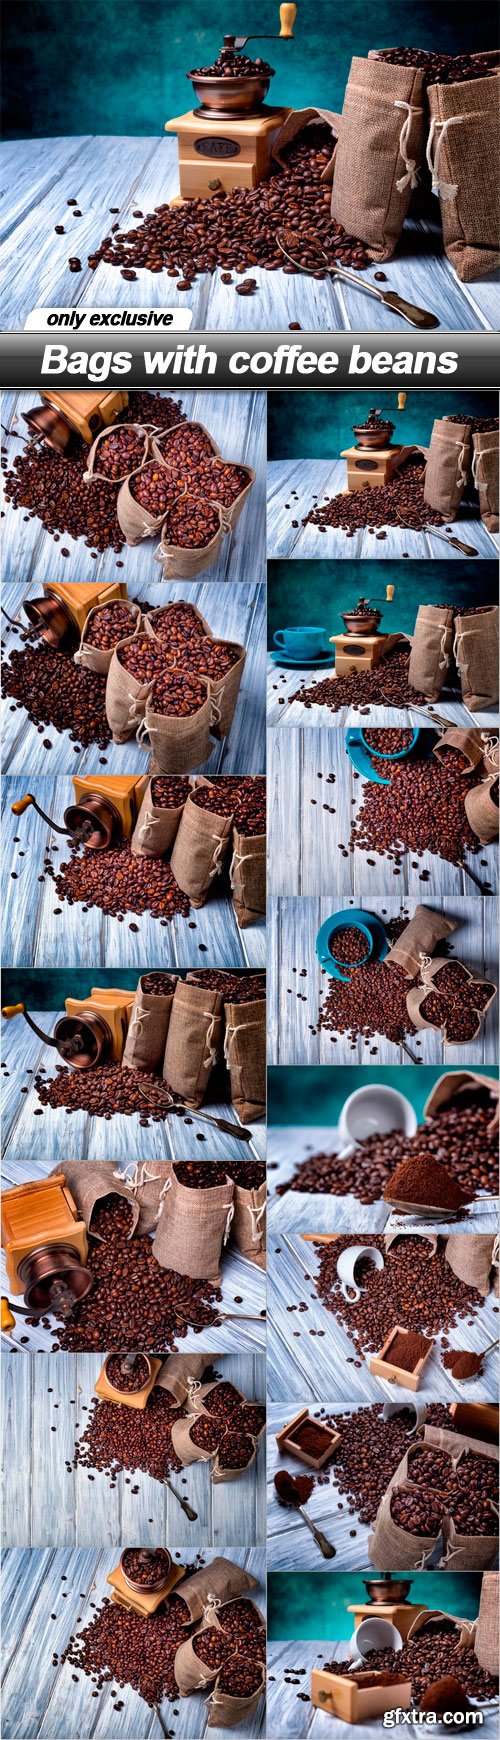 Bags with coffee beans - 15 UHQ JPEG